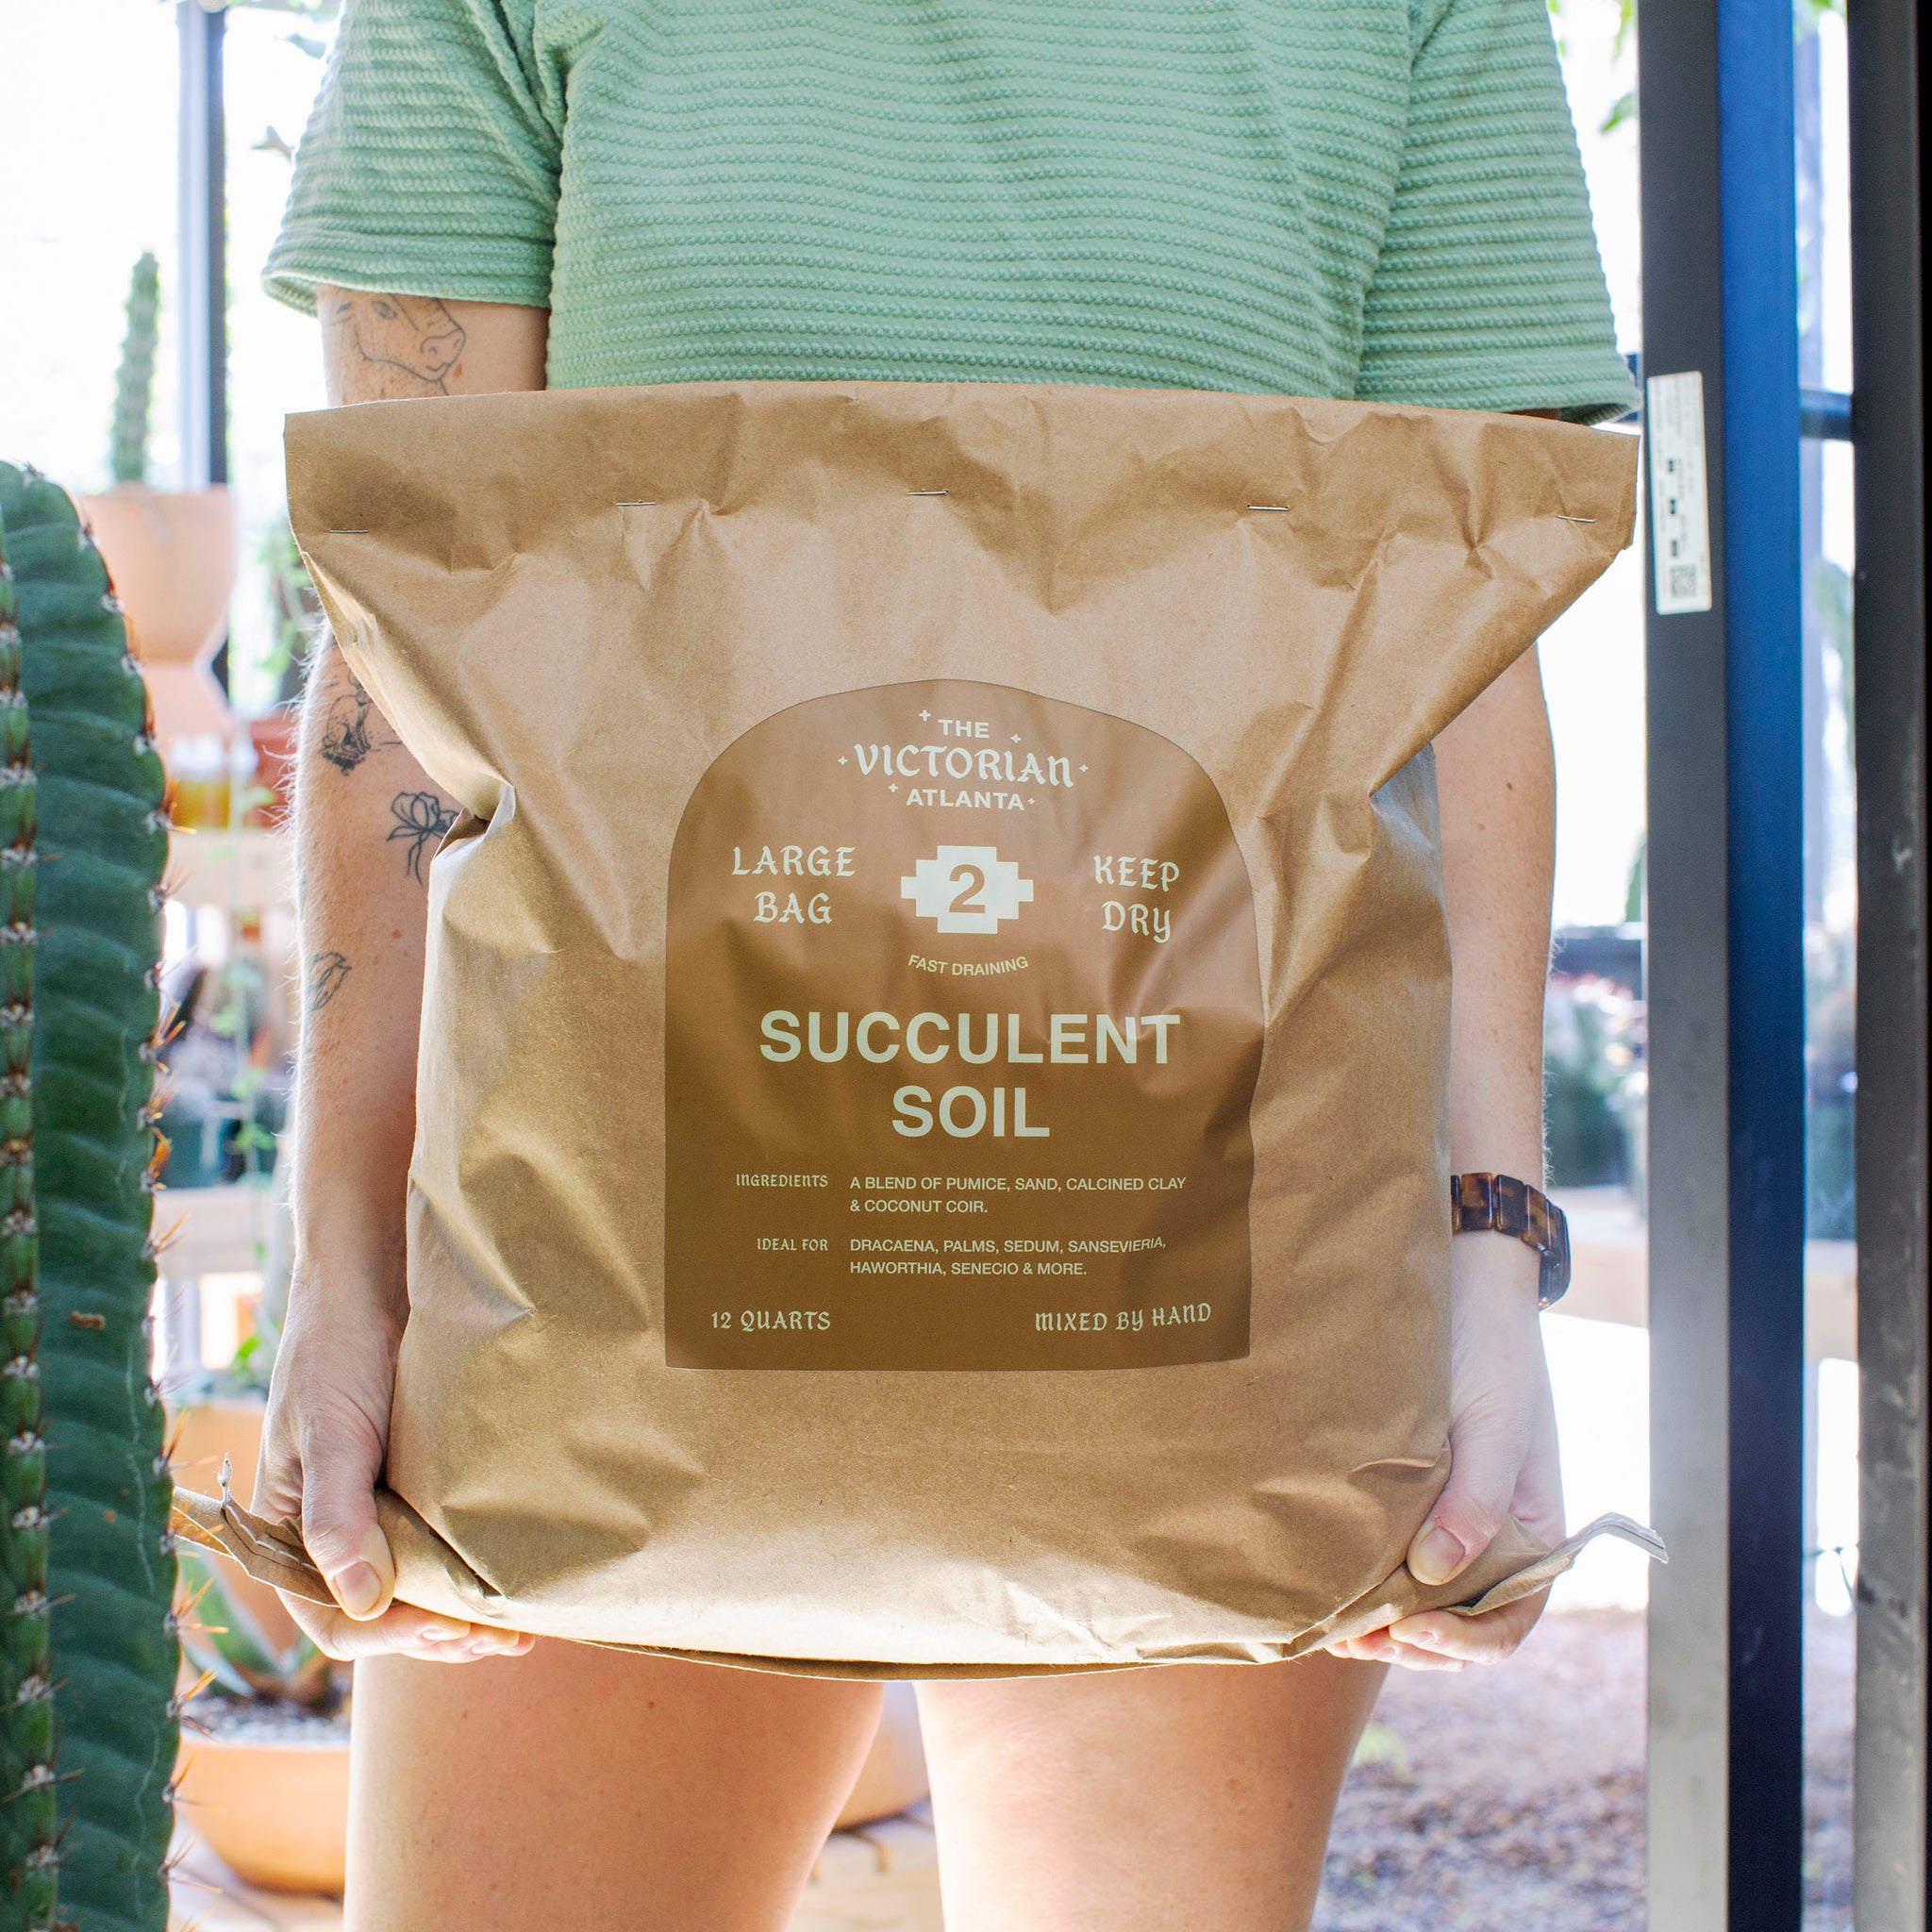 Soil - Succulent 2 (Formerly our Cactus Soil)